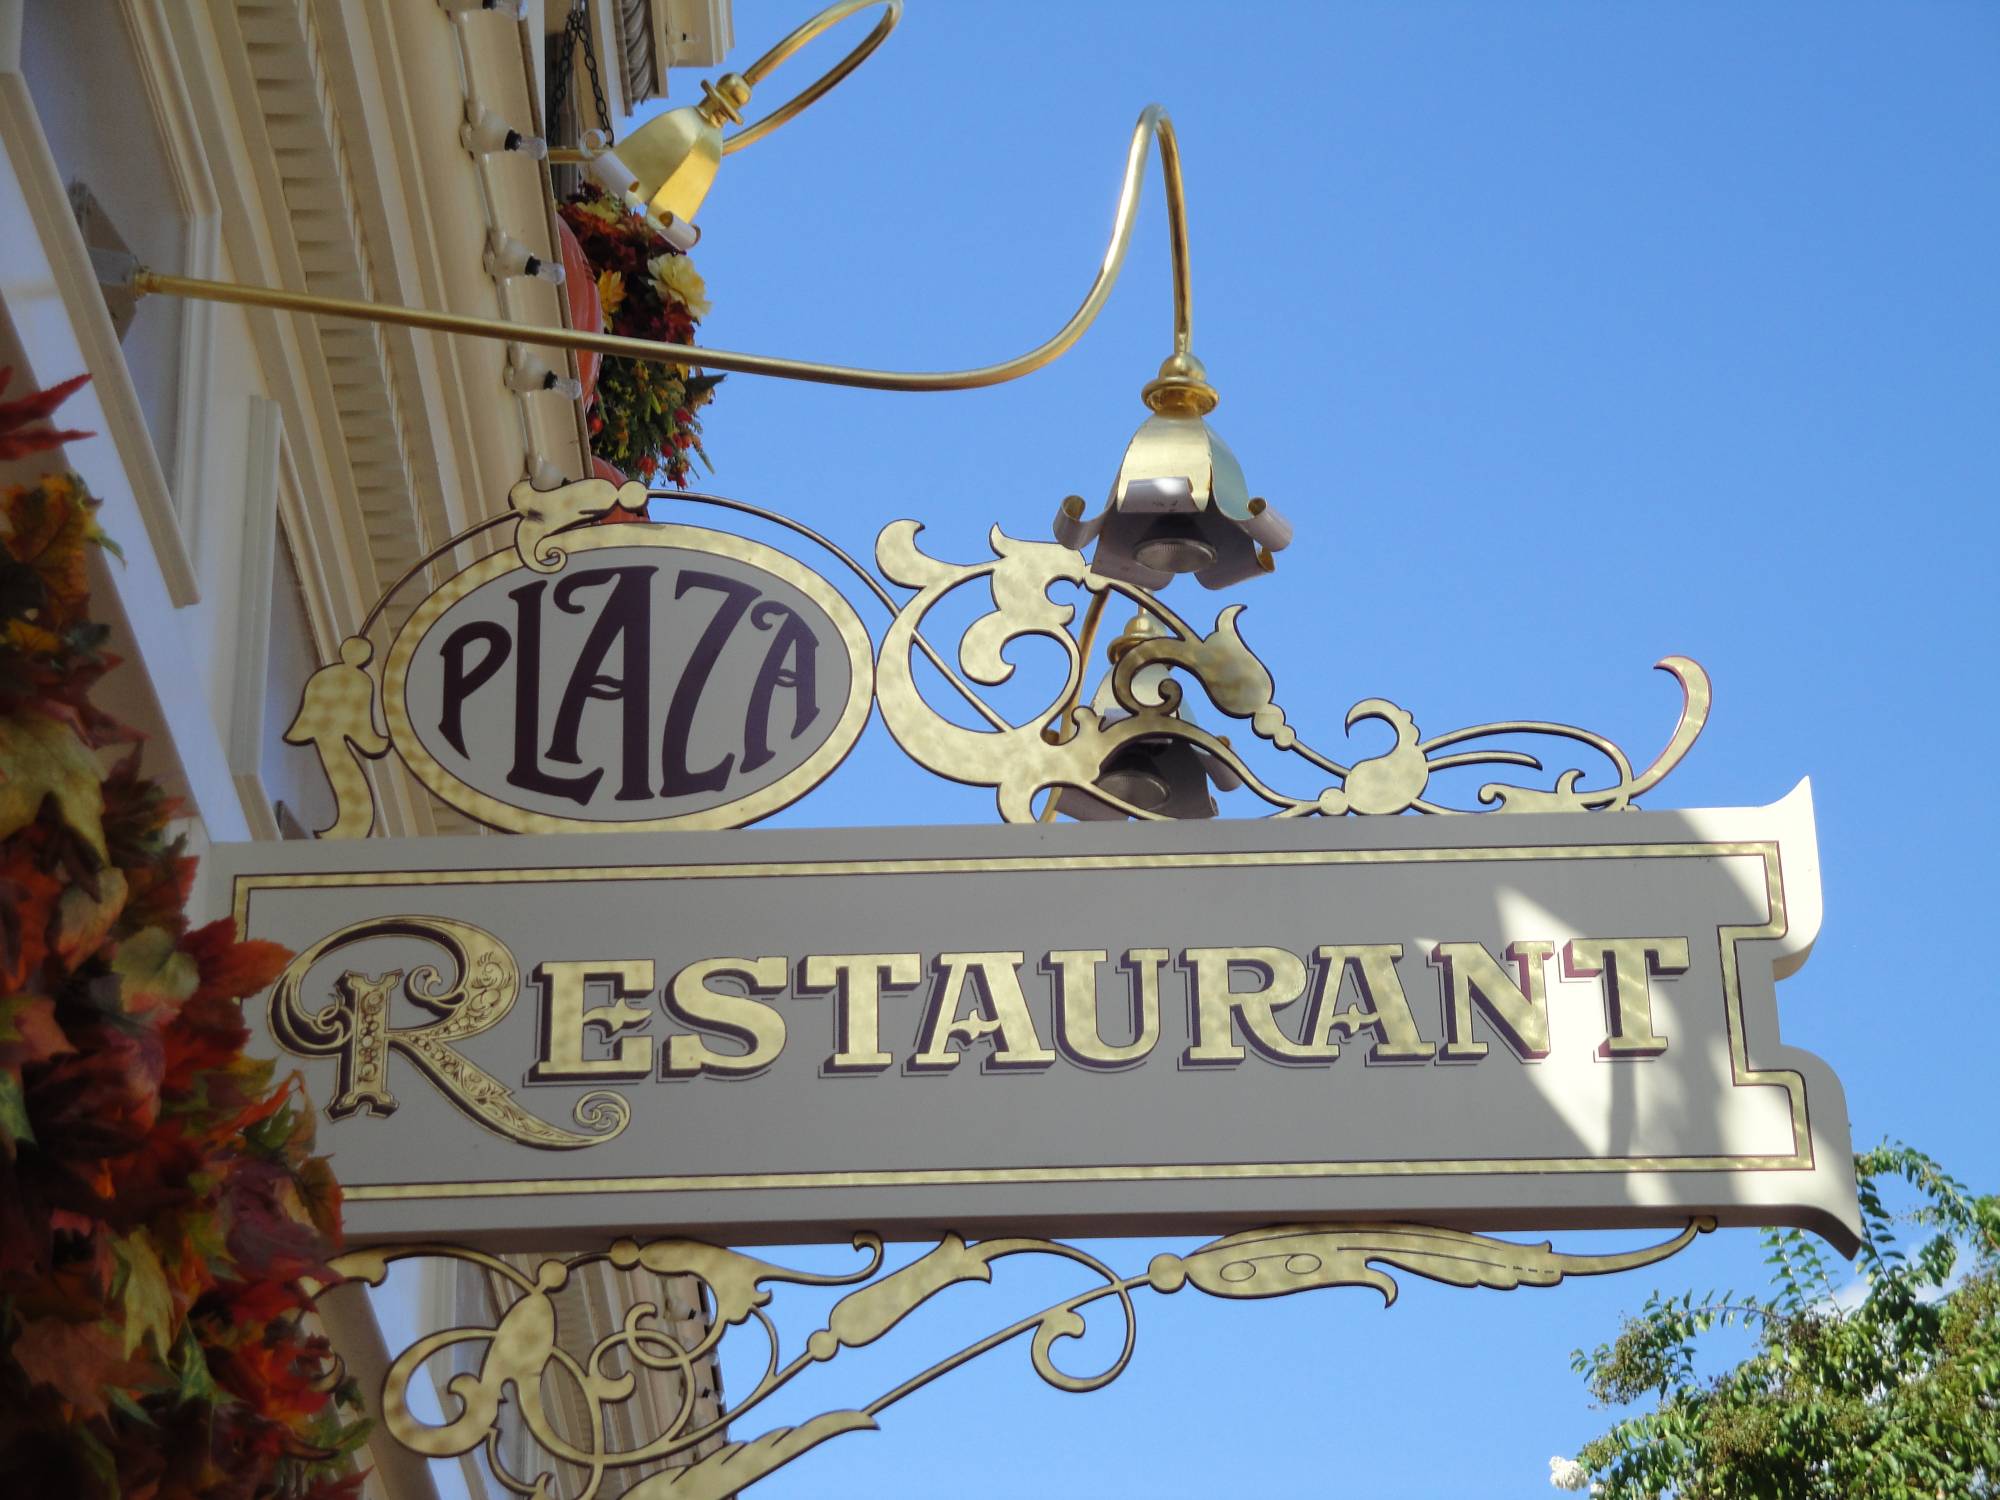 Enjoy a peaceful meal at the Plaza Restaurant in the Magic Kingdom |PassPorter.com